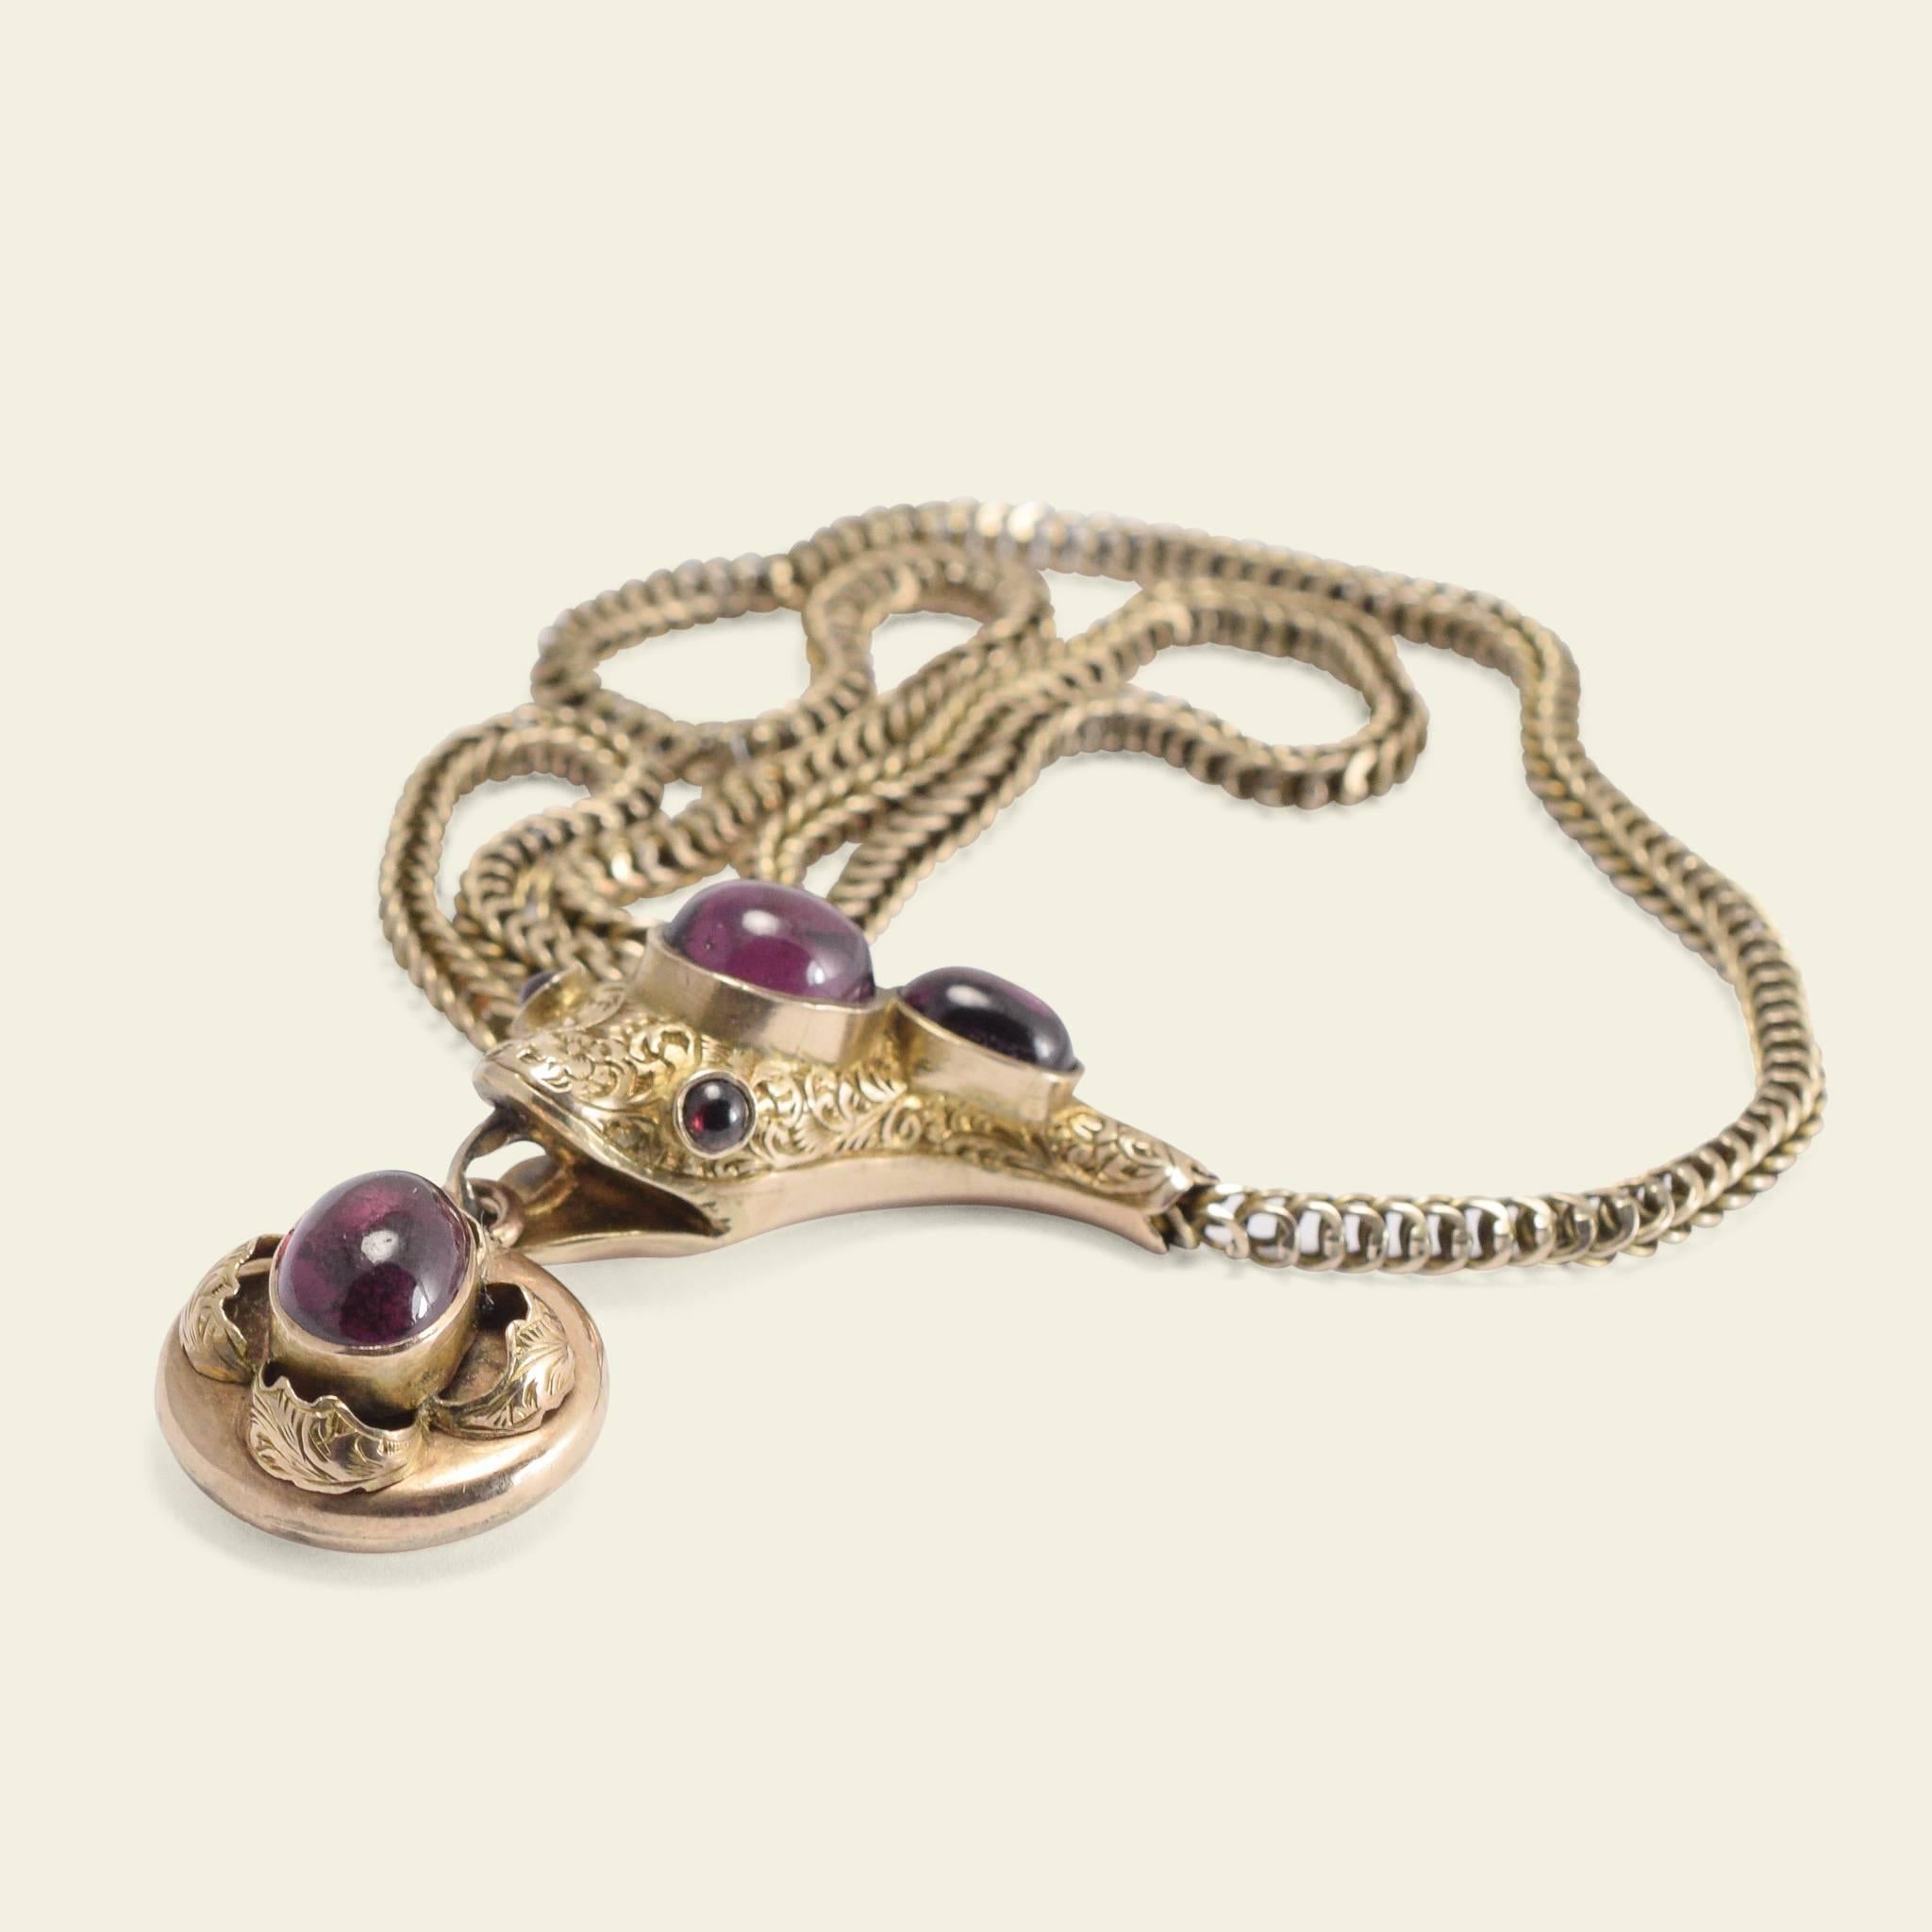 This Victorian era collar necklace is fashioned in the shape of a snake with a lovely linked chain for the body and a chased repoussé head holding a locket in its mouth. The necklace features purplish almandine garnet carbuncles mounted in 9k gold.